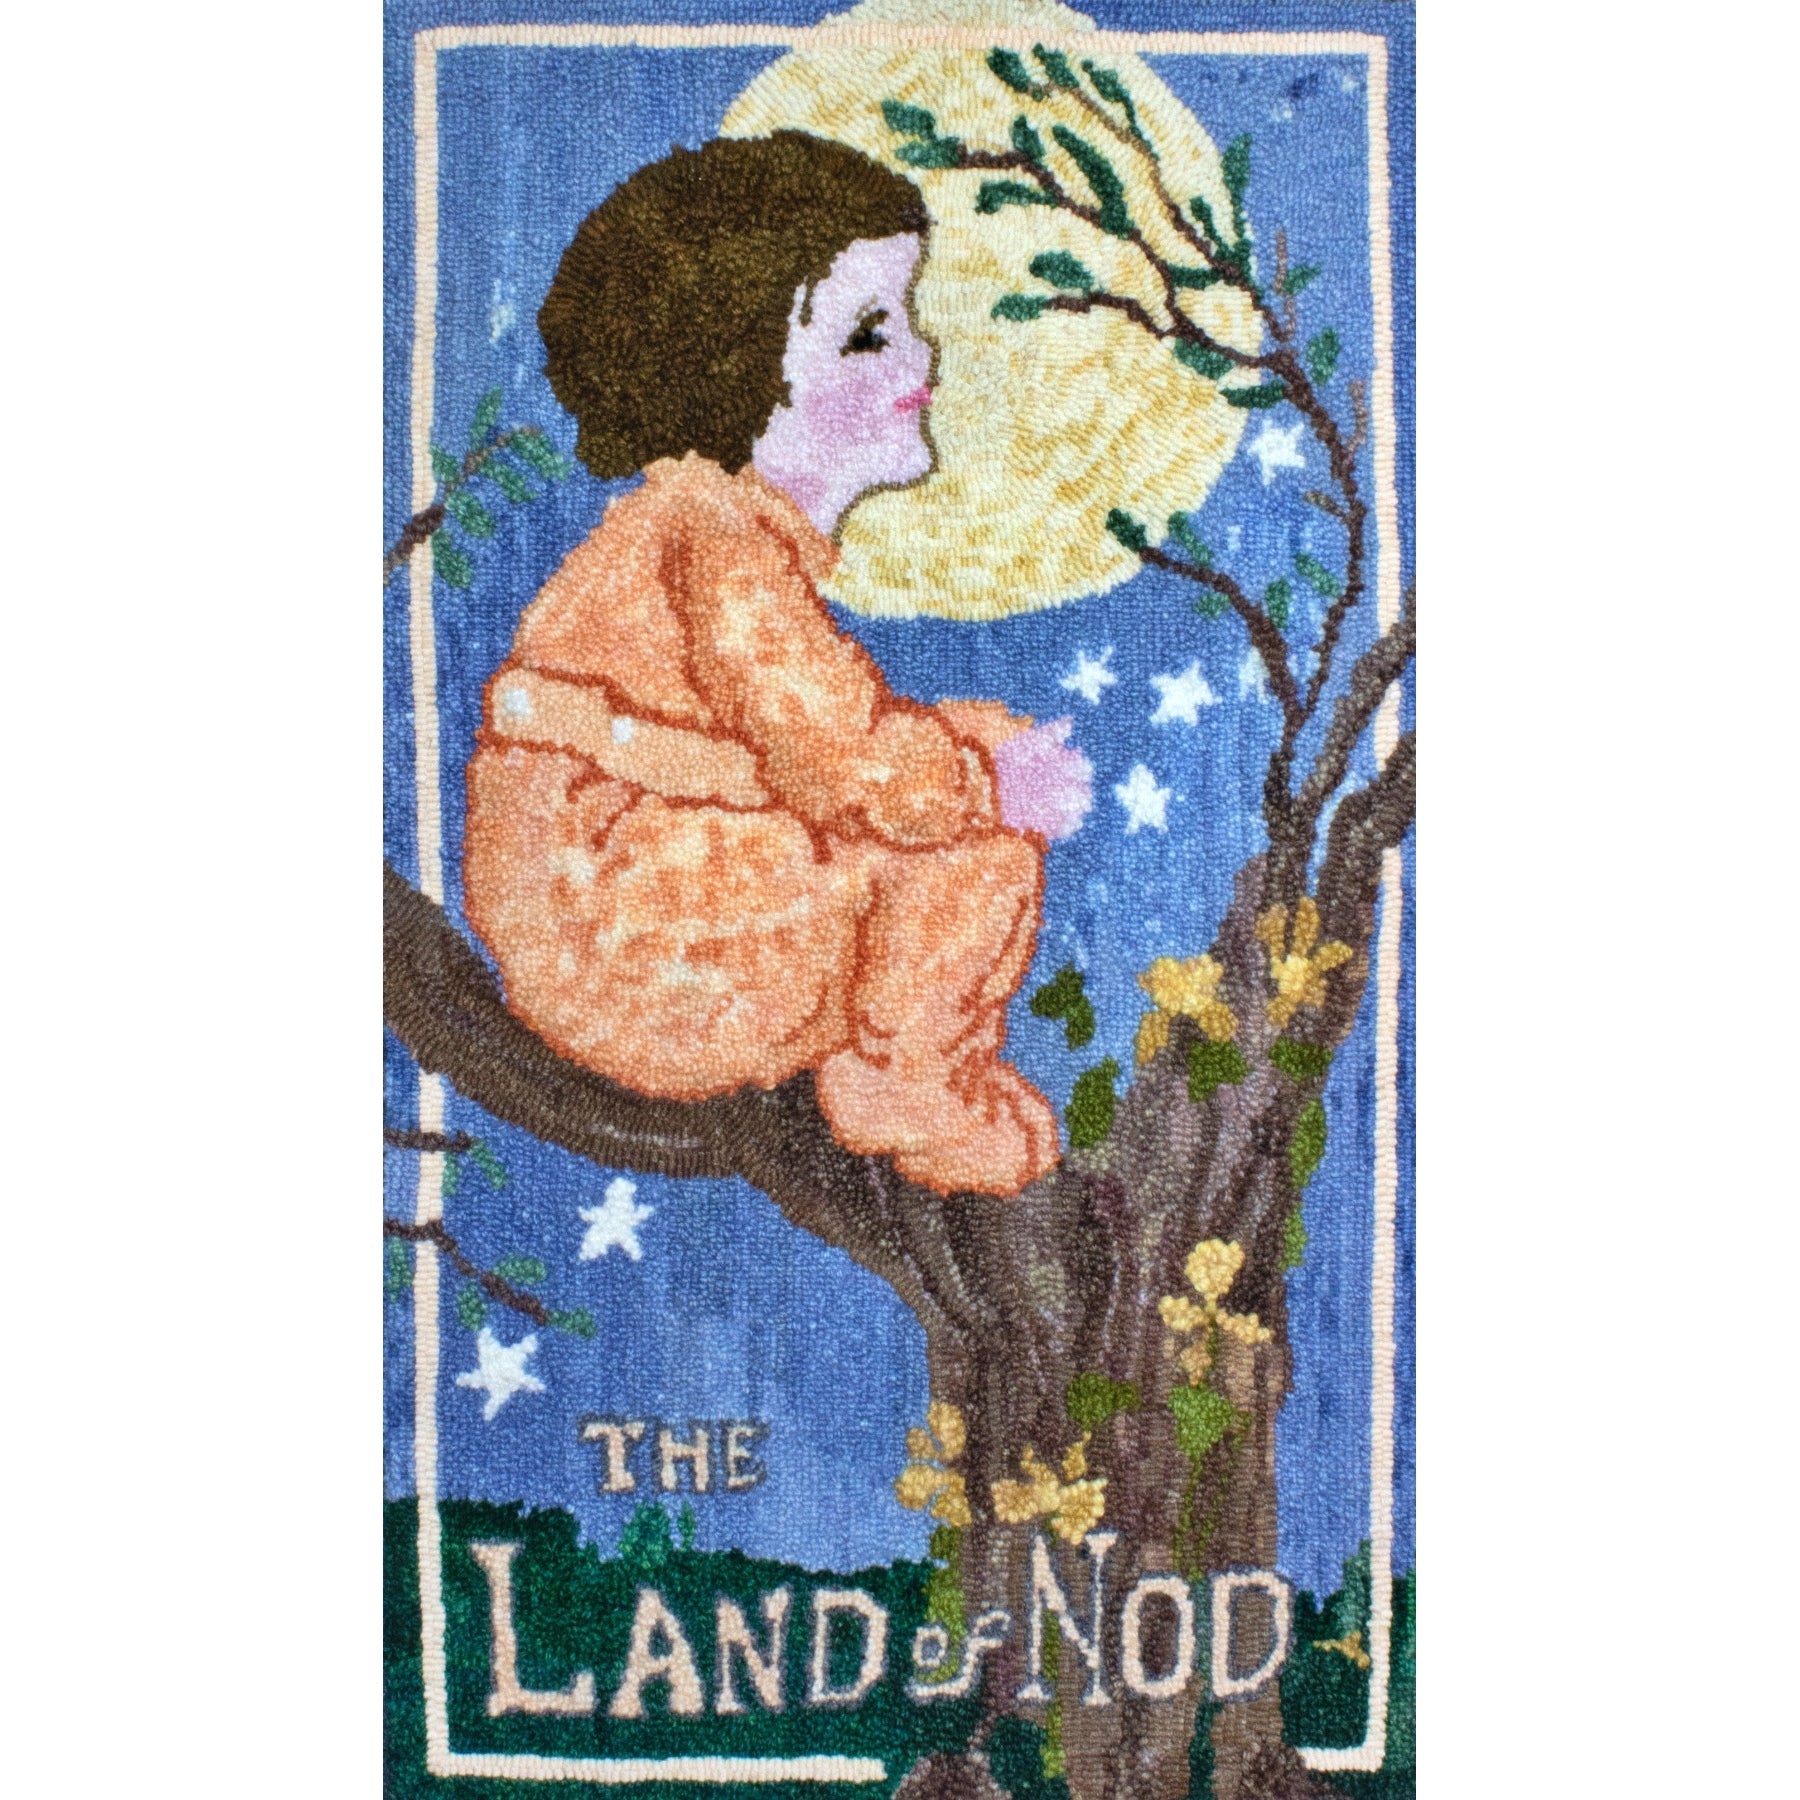 Land of Nod, rug hooked by Catherine Vance